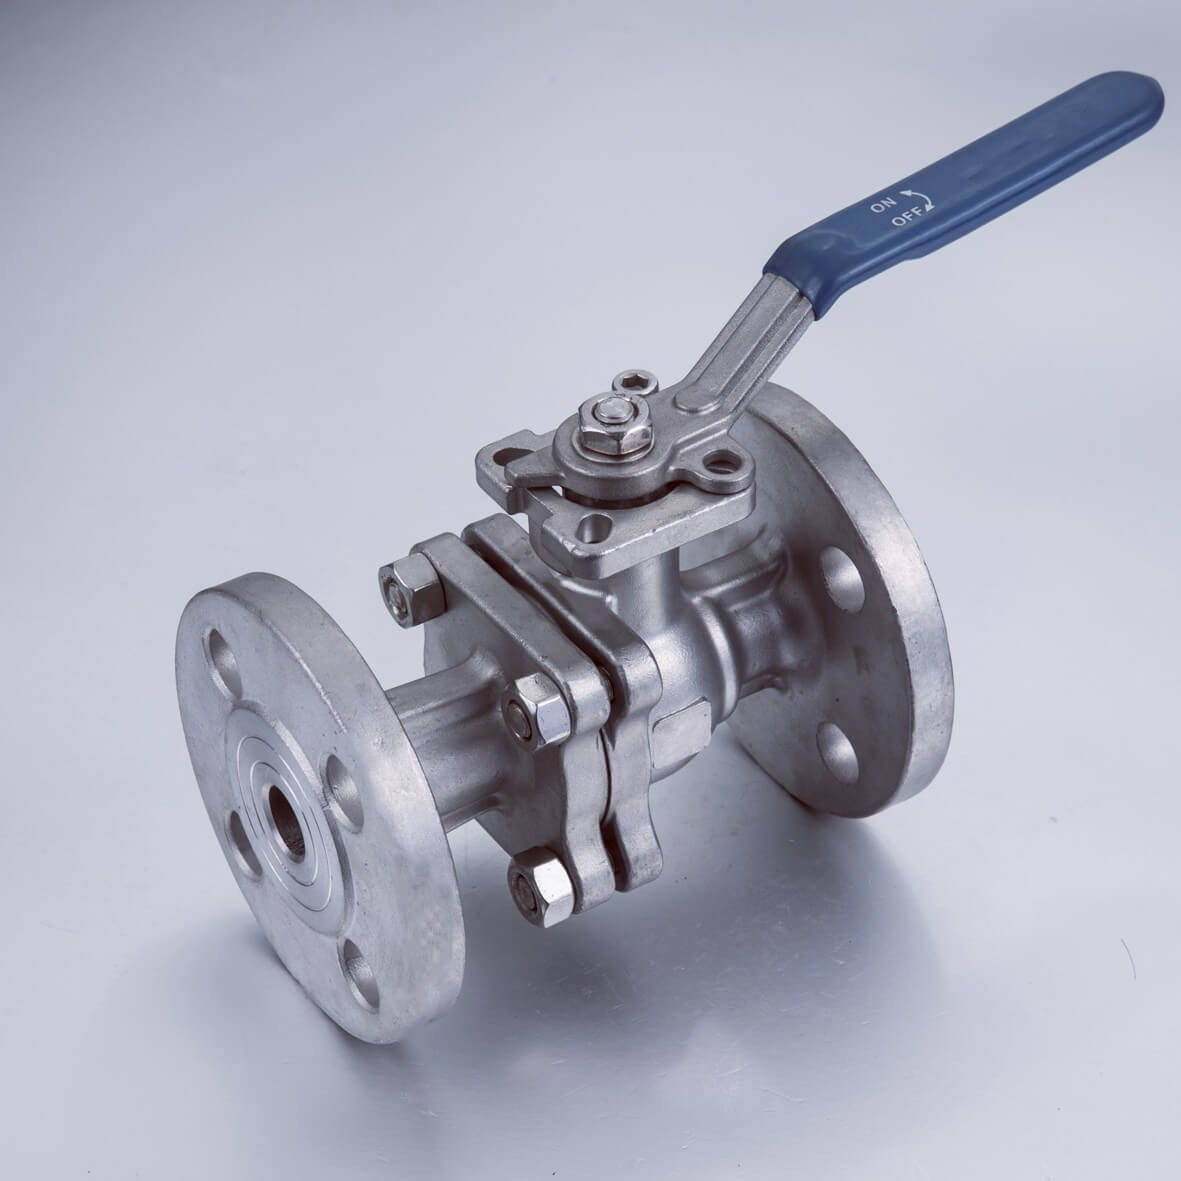  China Wholesale Industrial Equipment Pipe Fitting Stainless Steel Ball Valve